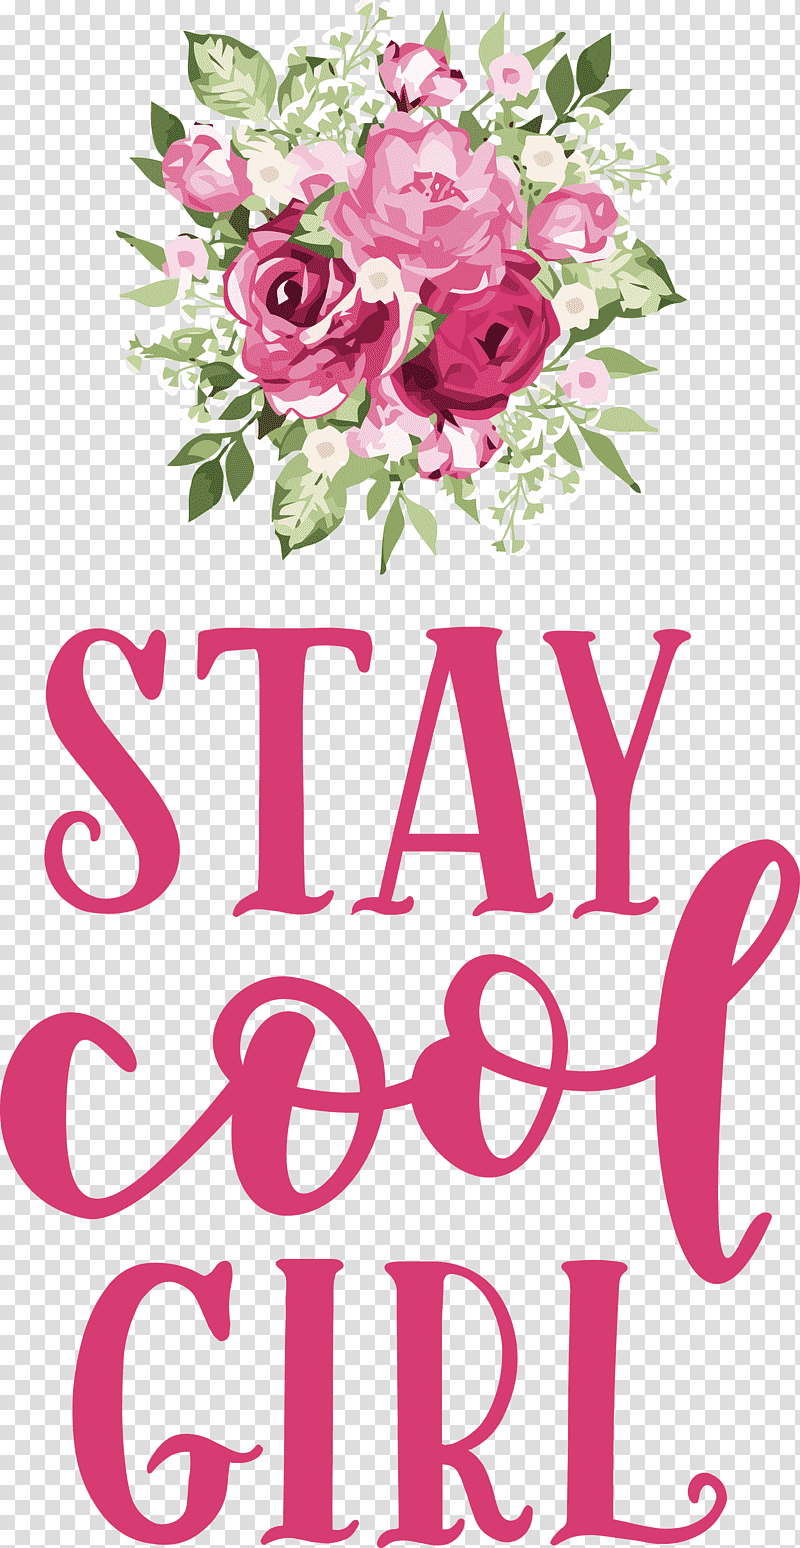 Stay Cool Girl Fashion Girl, Floral Design, Mug, Garden Roses, Cut Flowers, Greeting Card transparent background PNG clipart